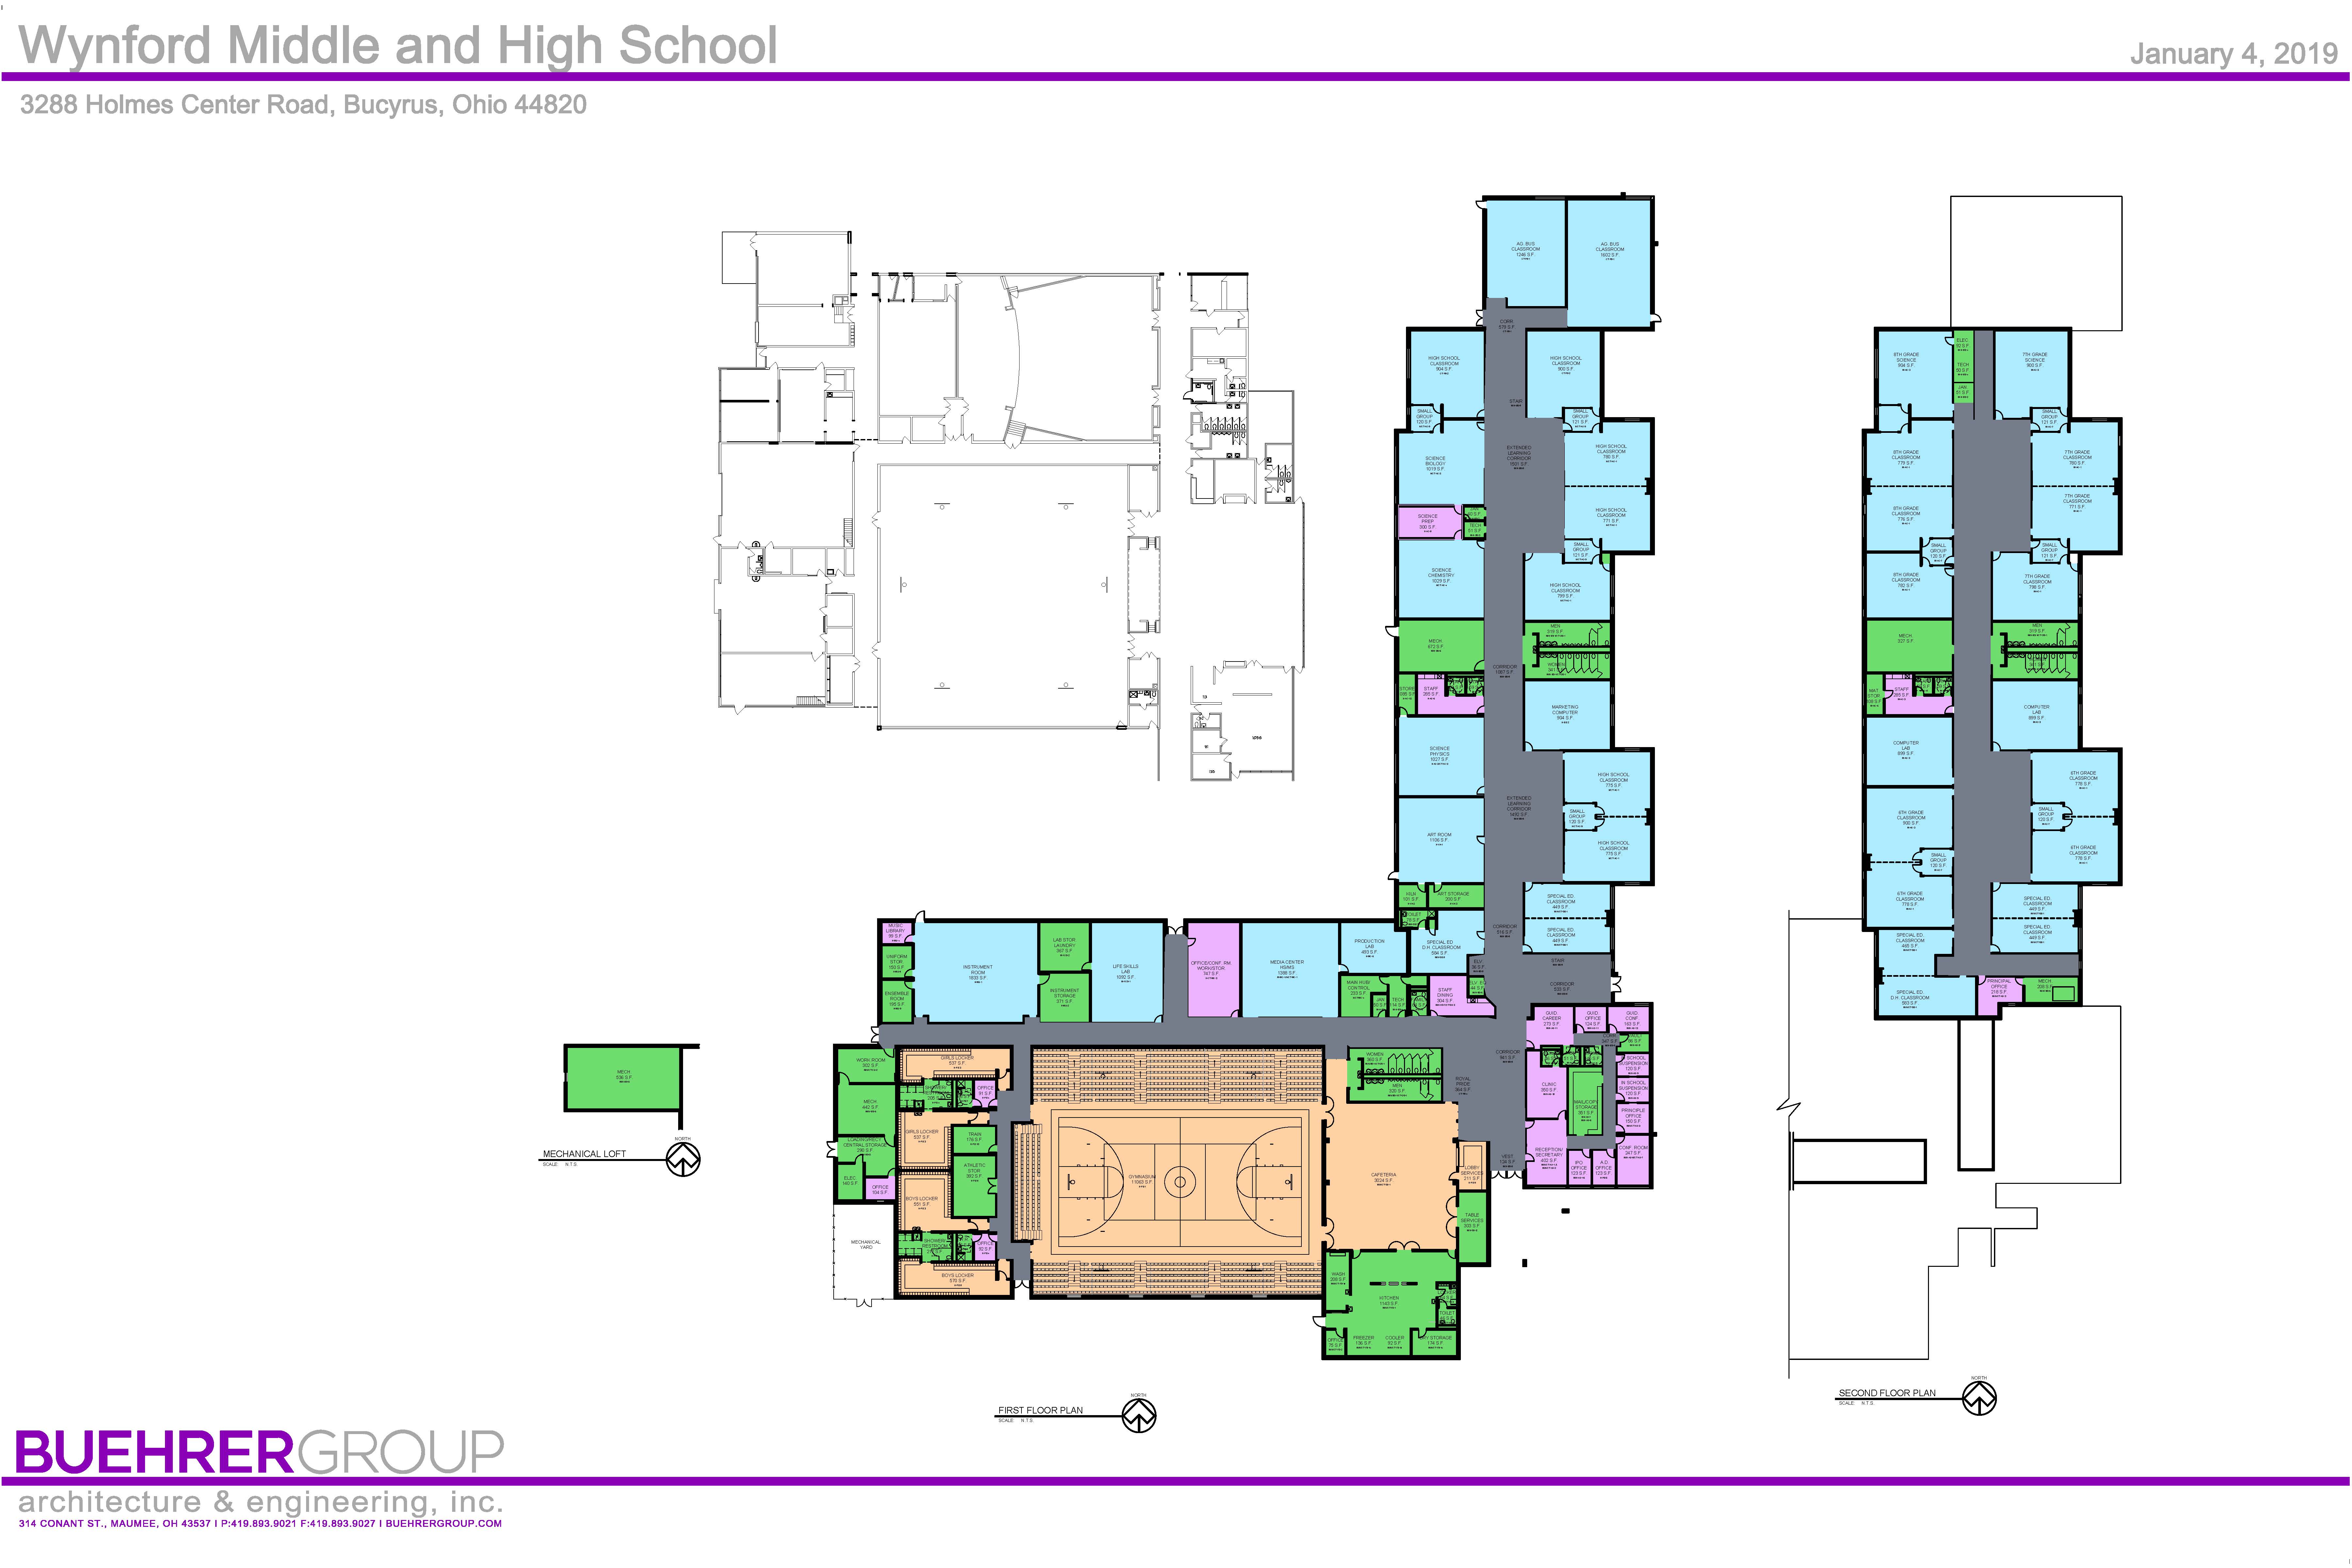 Wynford Middle and High School construction plans.